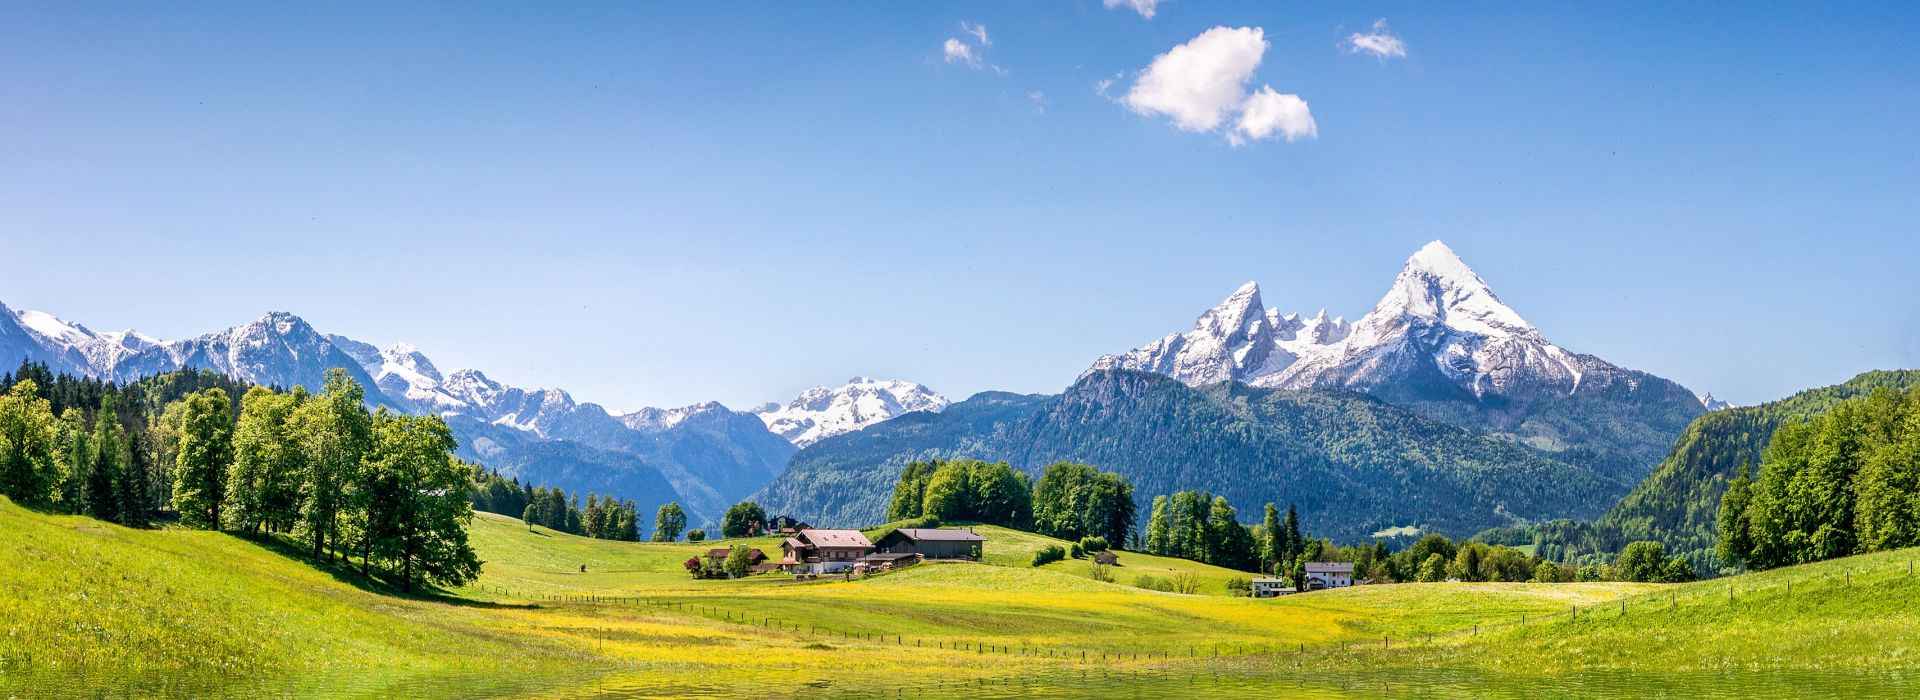 Switzerland Travel Guide - Travel Insights and Tips